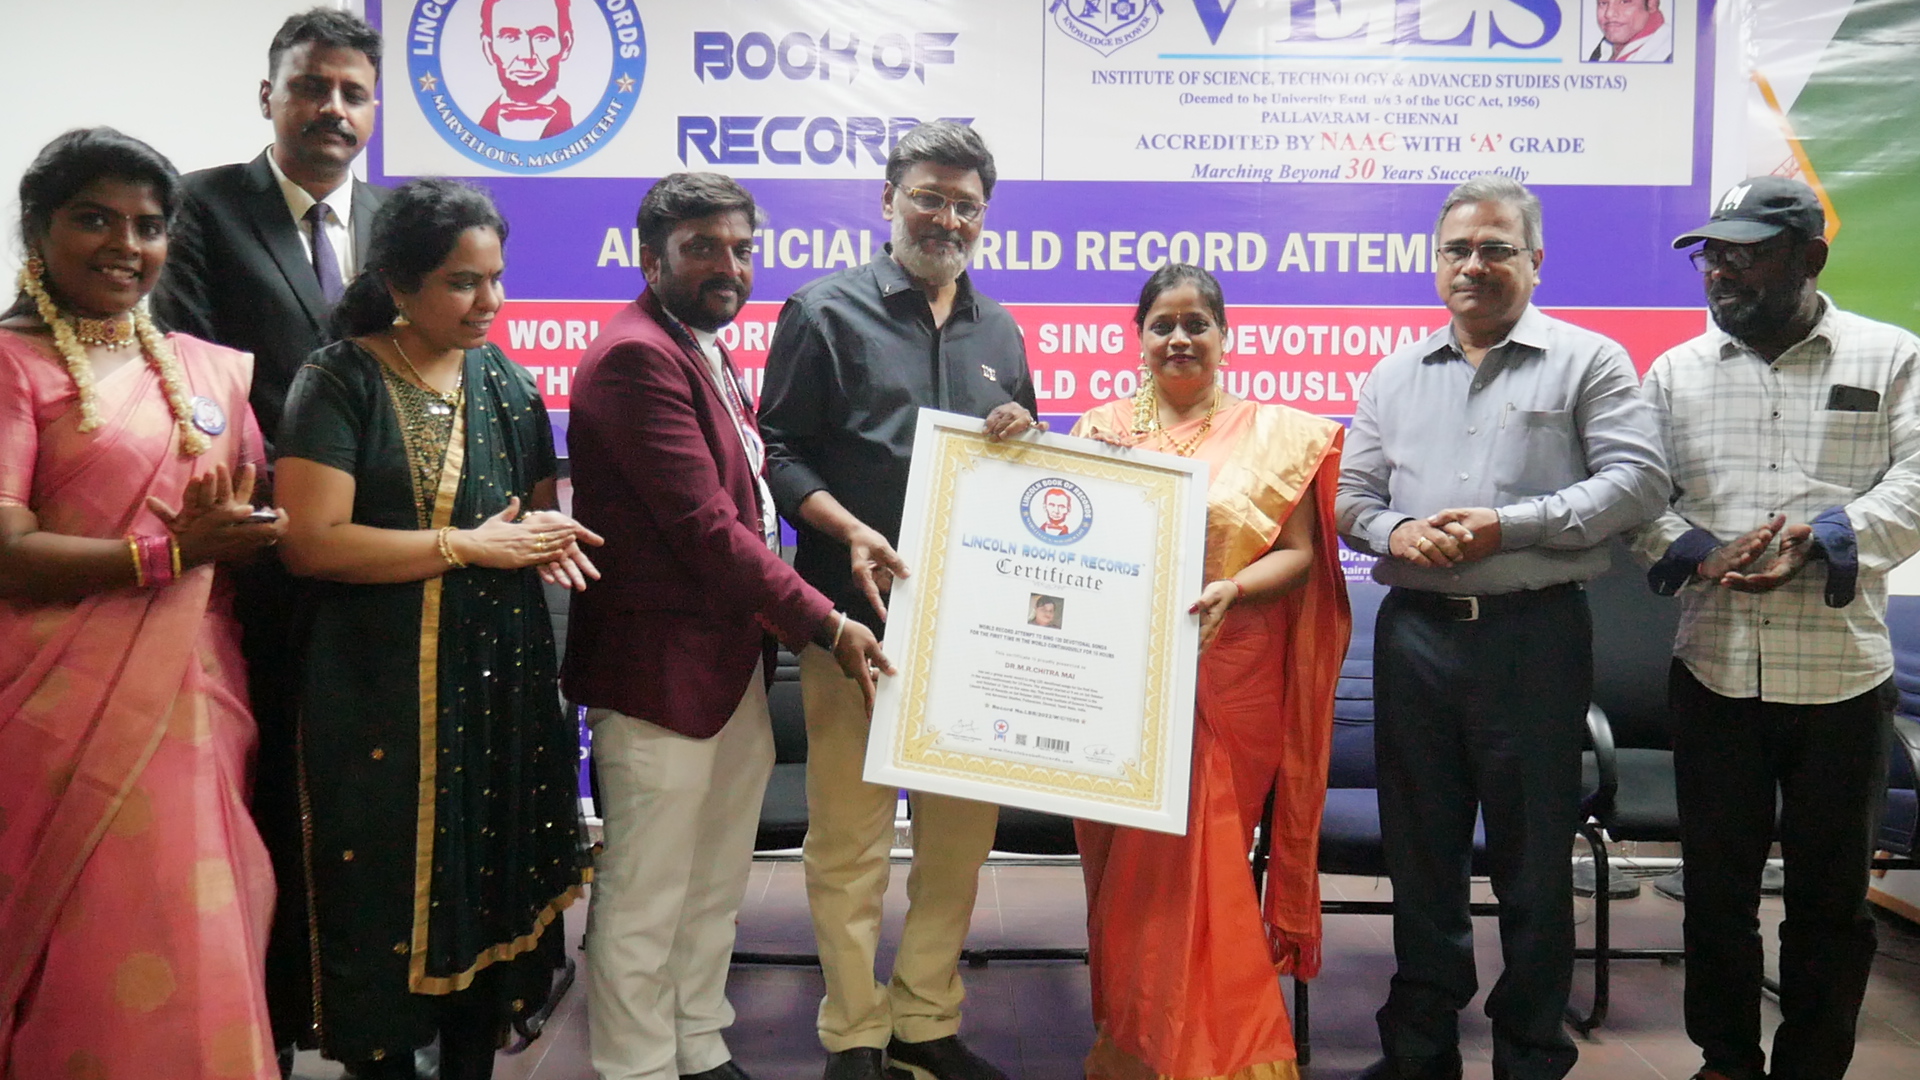 WORLD RECORD ATTEMPT TO SING 120 DEVOTIONAL SONGS  FOR THE FIRST TIME IN THE WORLD CONTINUOUSLY FOR 10 HOURS